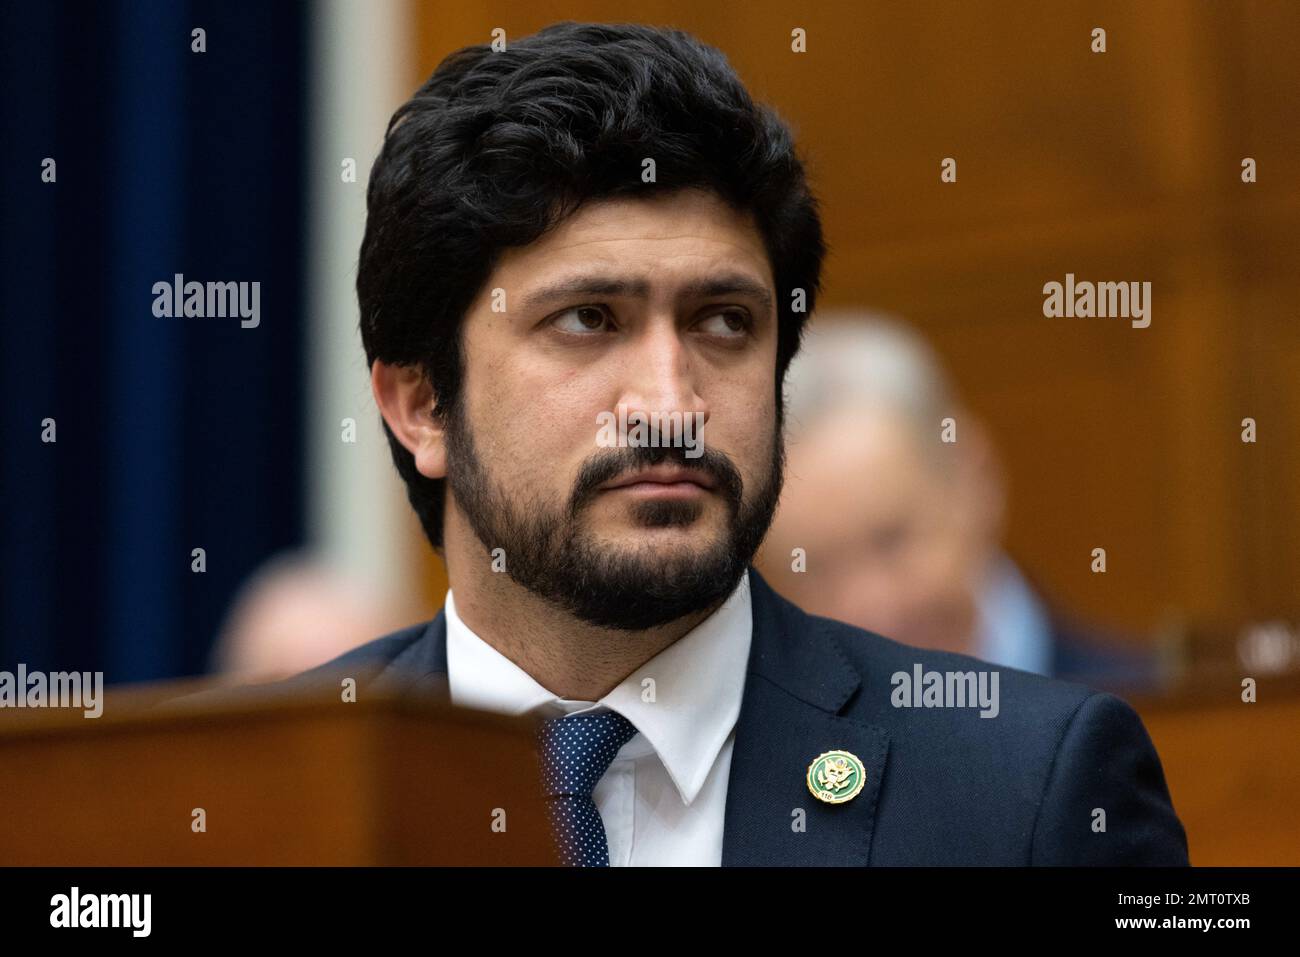 United States Representative Greg Casar (Democrat of Texas) during a meeting of the US House Committee on Oversight and Accountability in Washington, D.C., USA, Tuesday, January 31, 2023. Photo by Julia Nikhinson/CNP/ABACAPRESS.COM Stock Photo